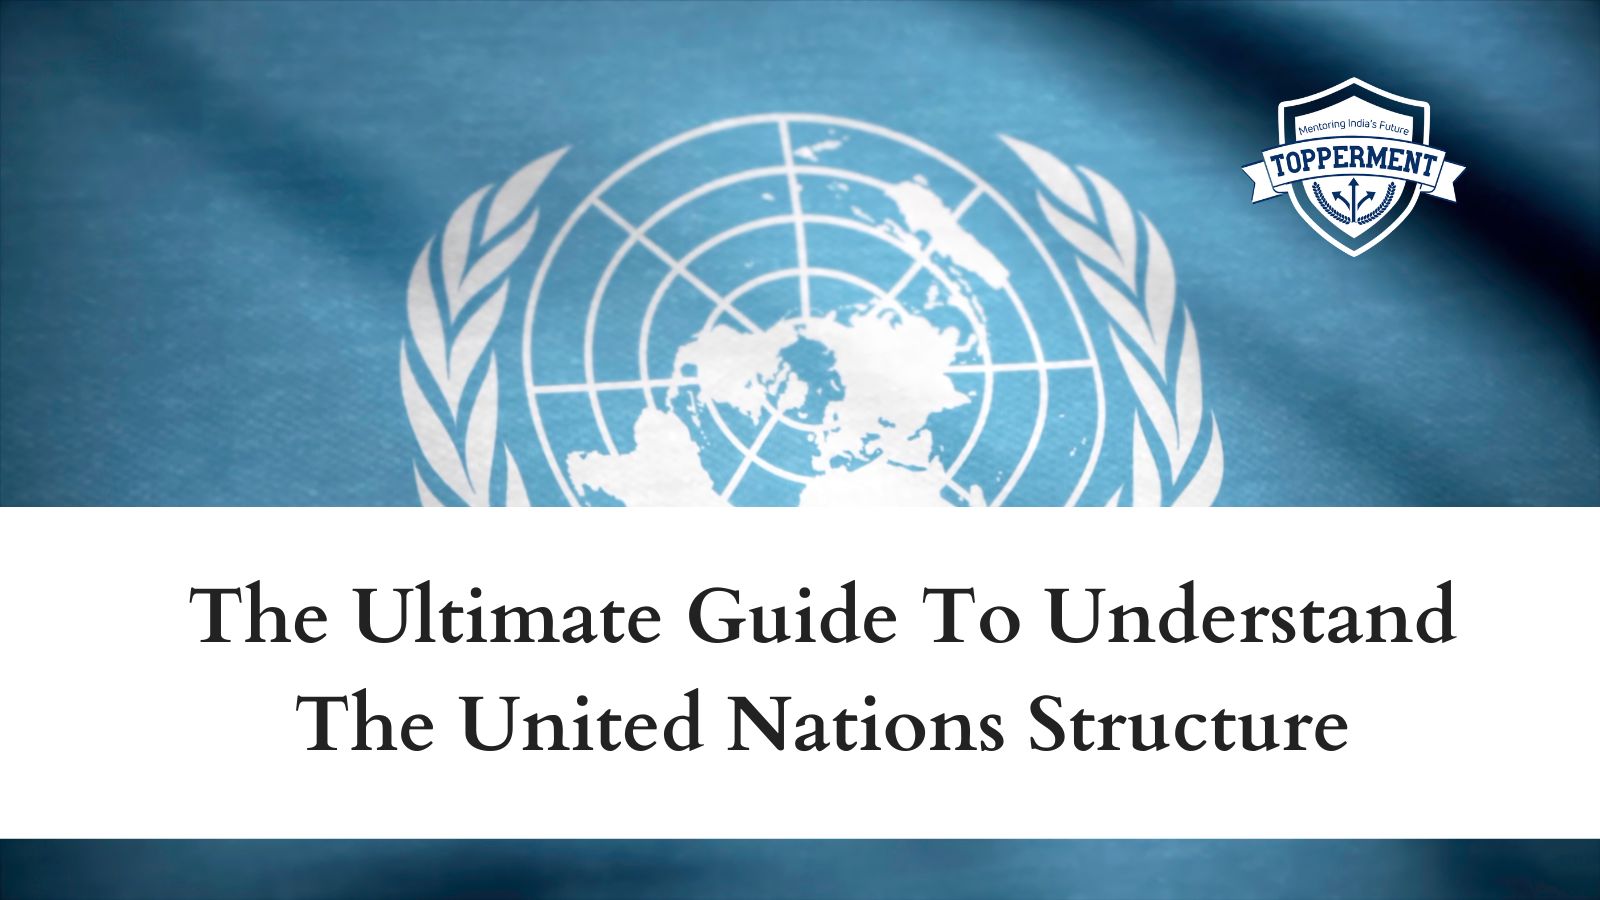 The-Ultimate-Guide-To-Understand-The-United-Nations-Structure-Best-UPSC-IAS-Coaching-For-Mentorship-And-Guidance